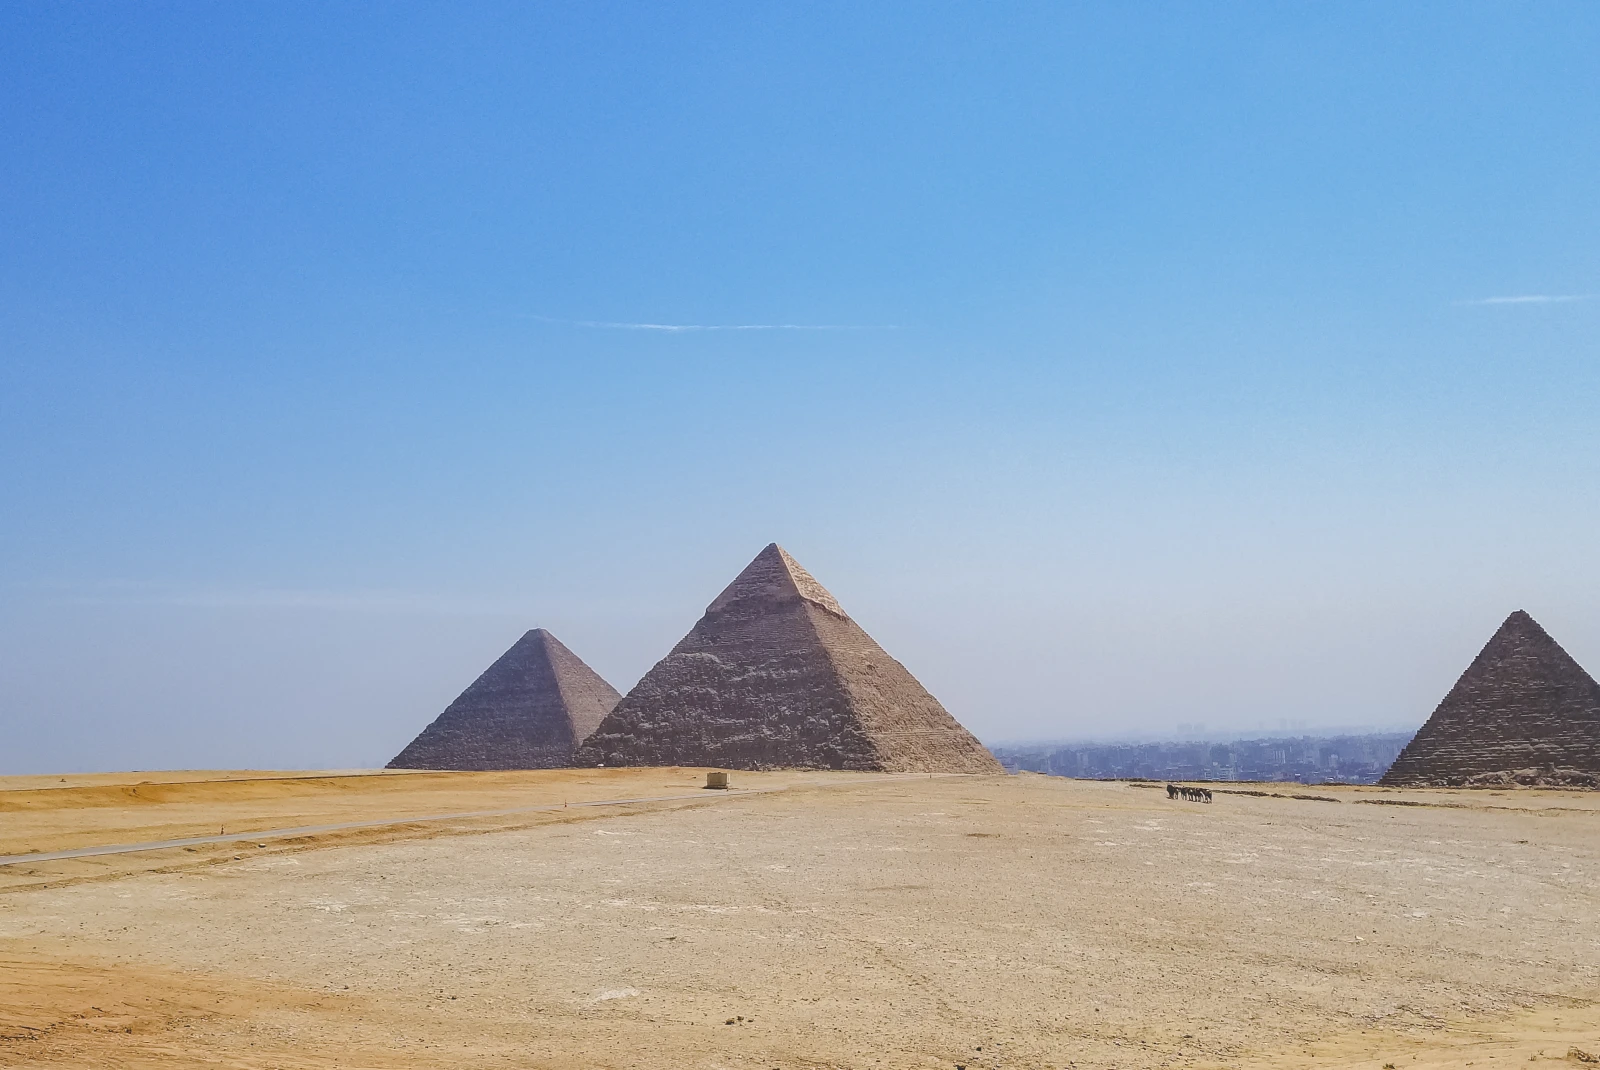 Pyramids with blue skies during daytime